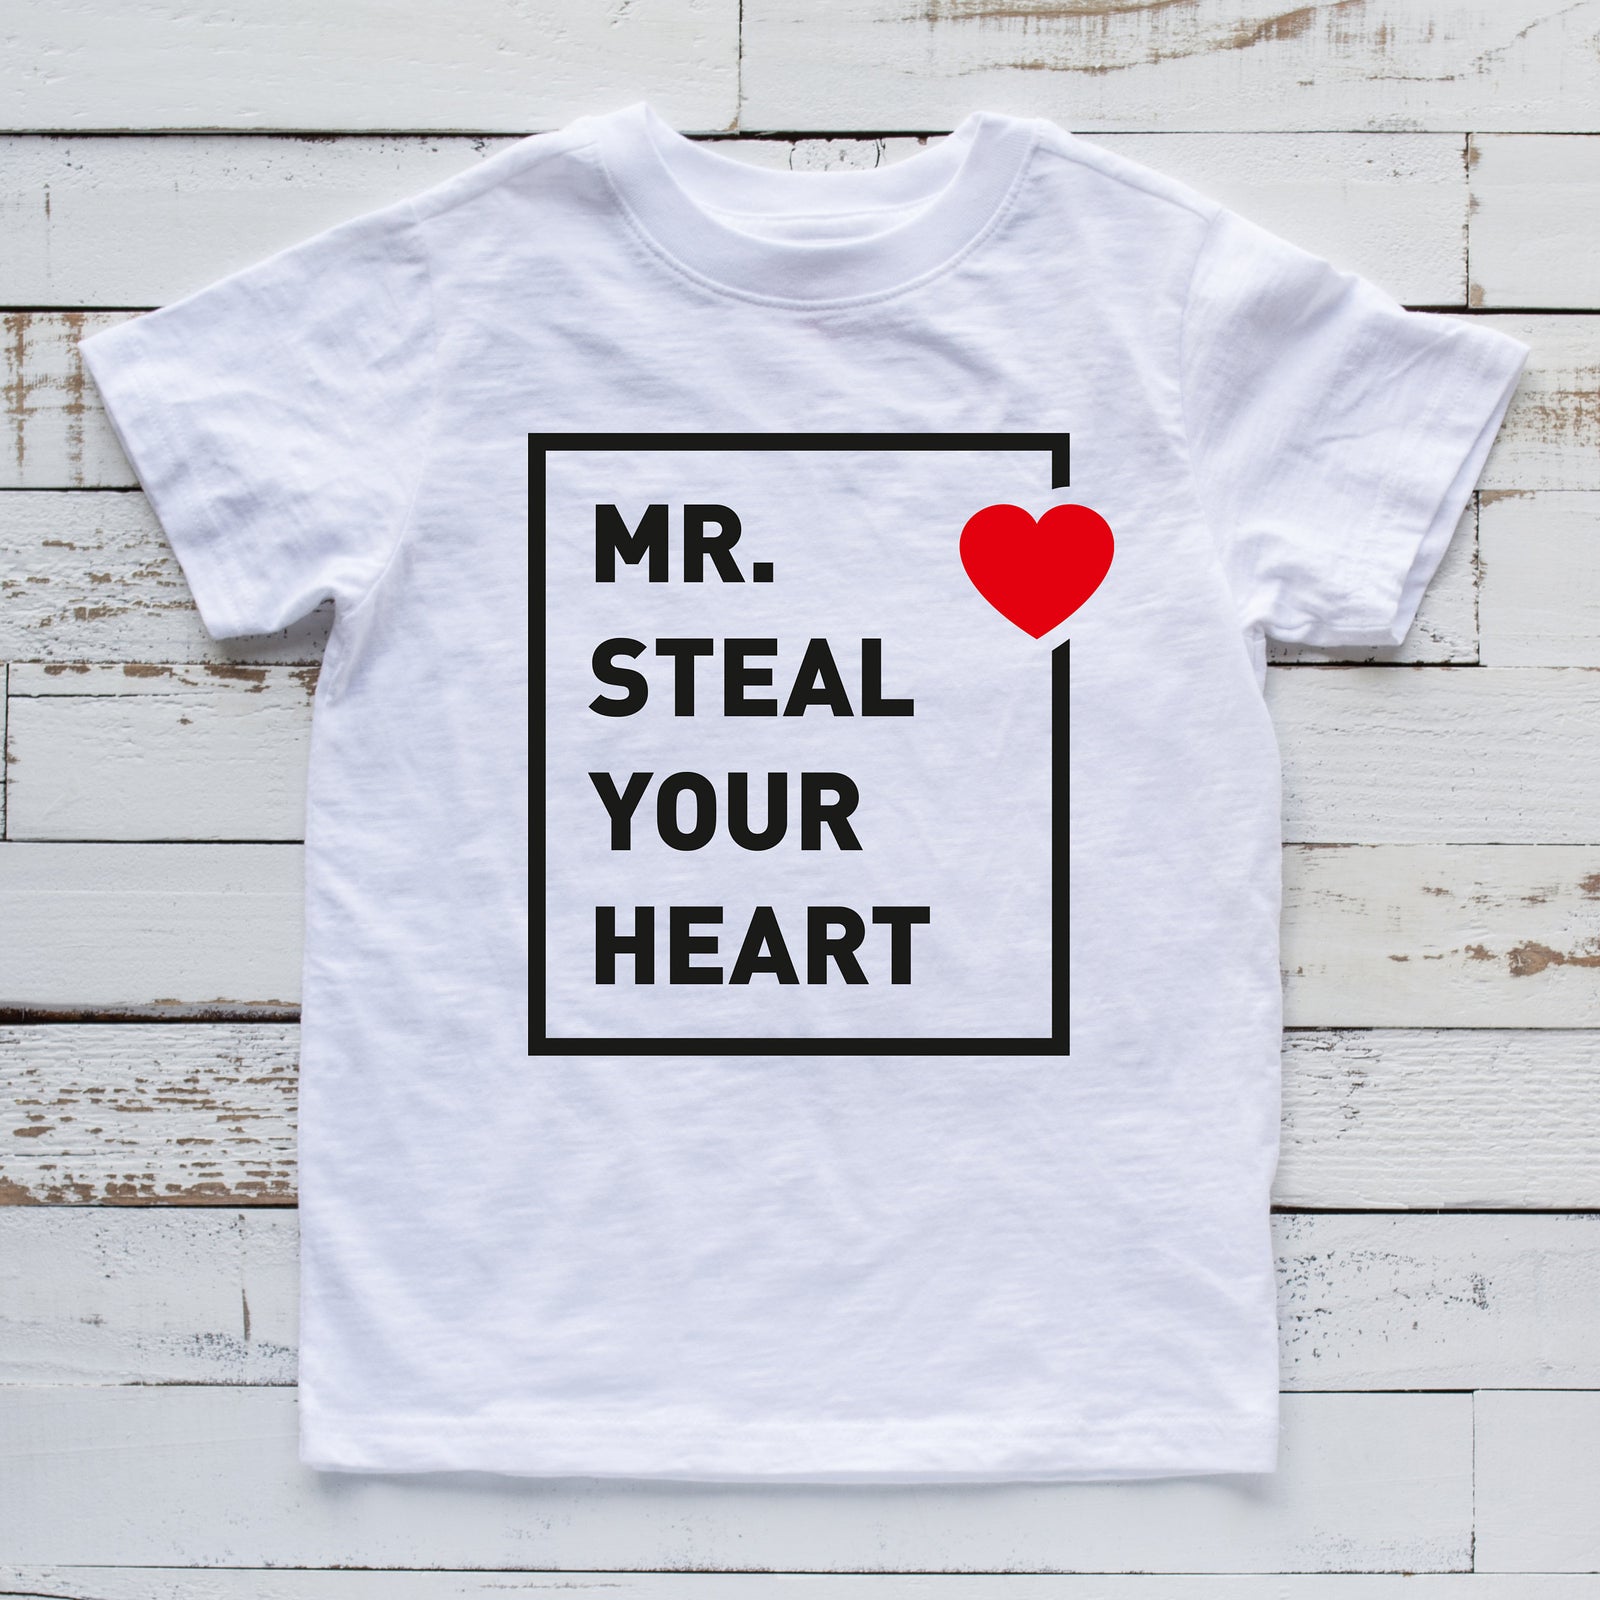 Mr Steal Your Heart T Shirt - Funny Valentine Shirt - Love T Shirt - Heart Breaker Statement Shirt - Valentine's Humor Shirt